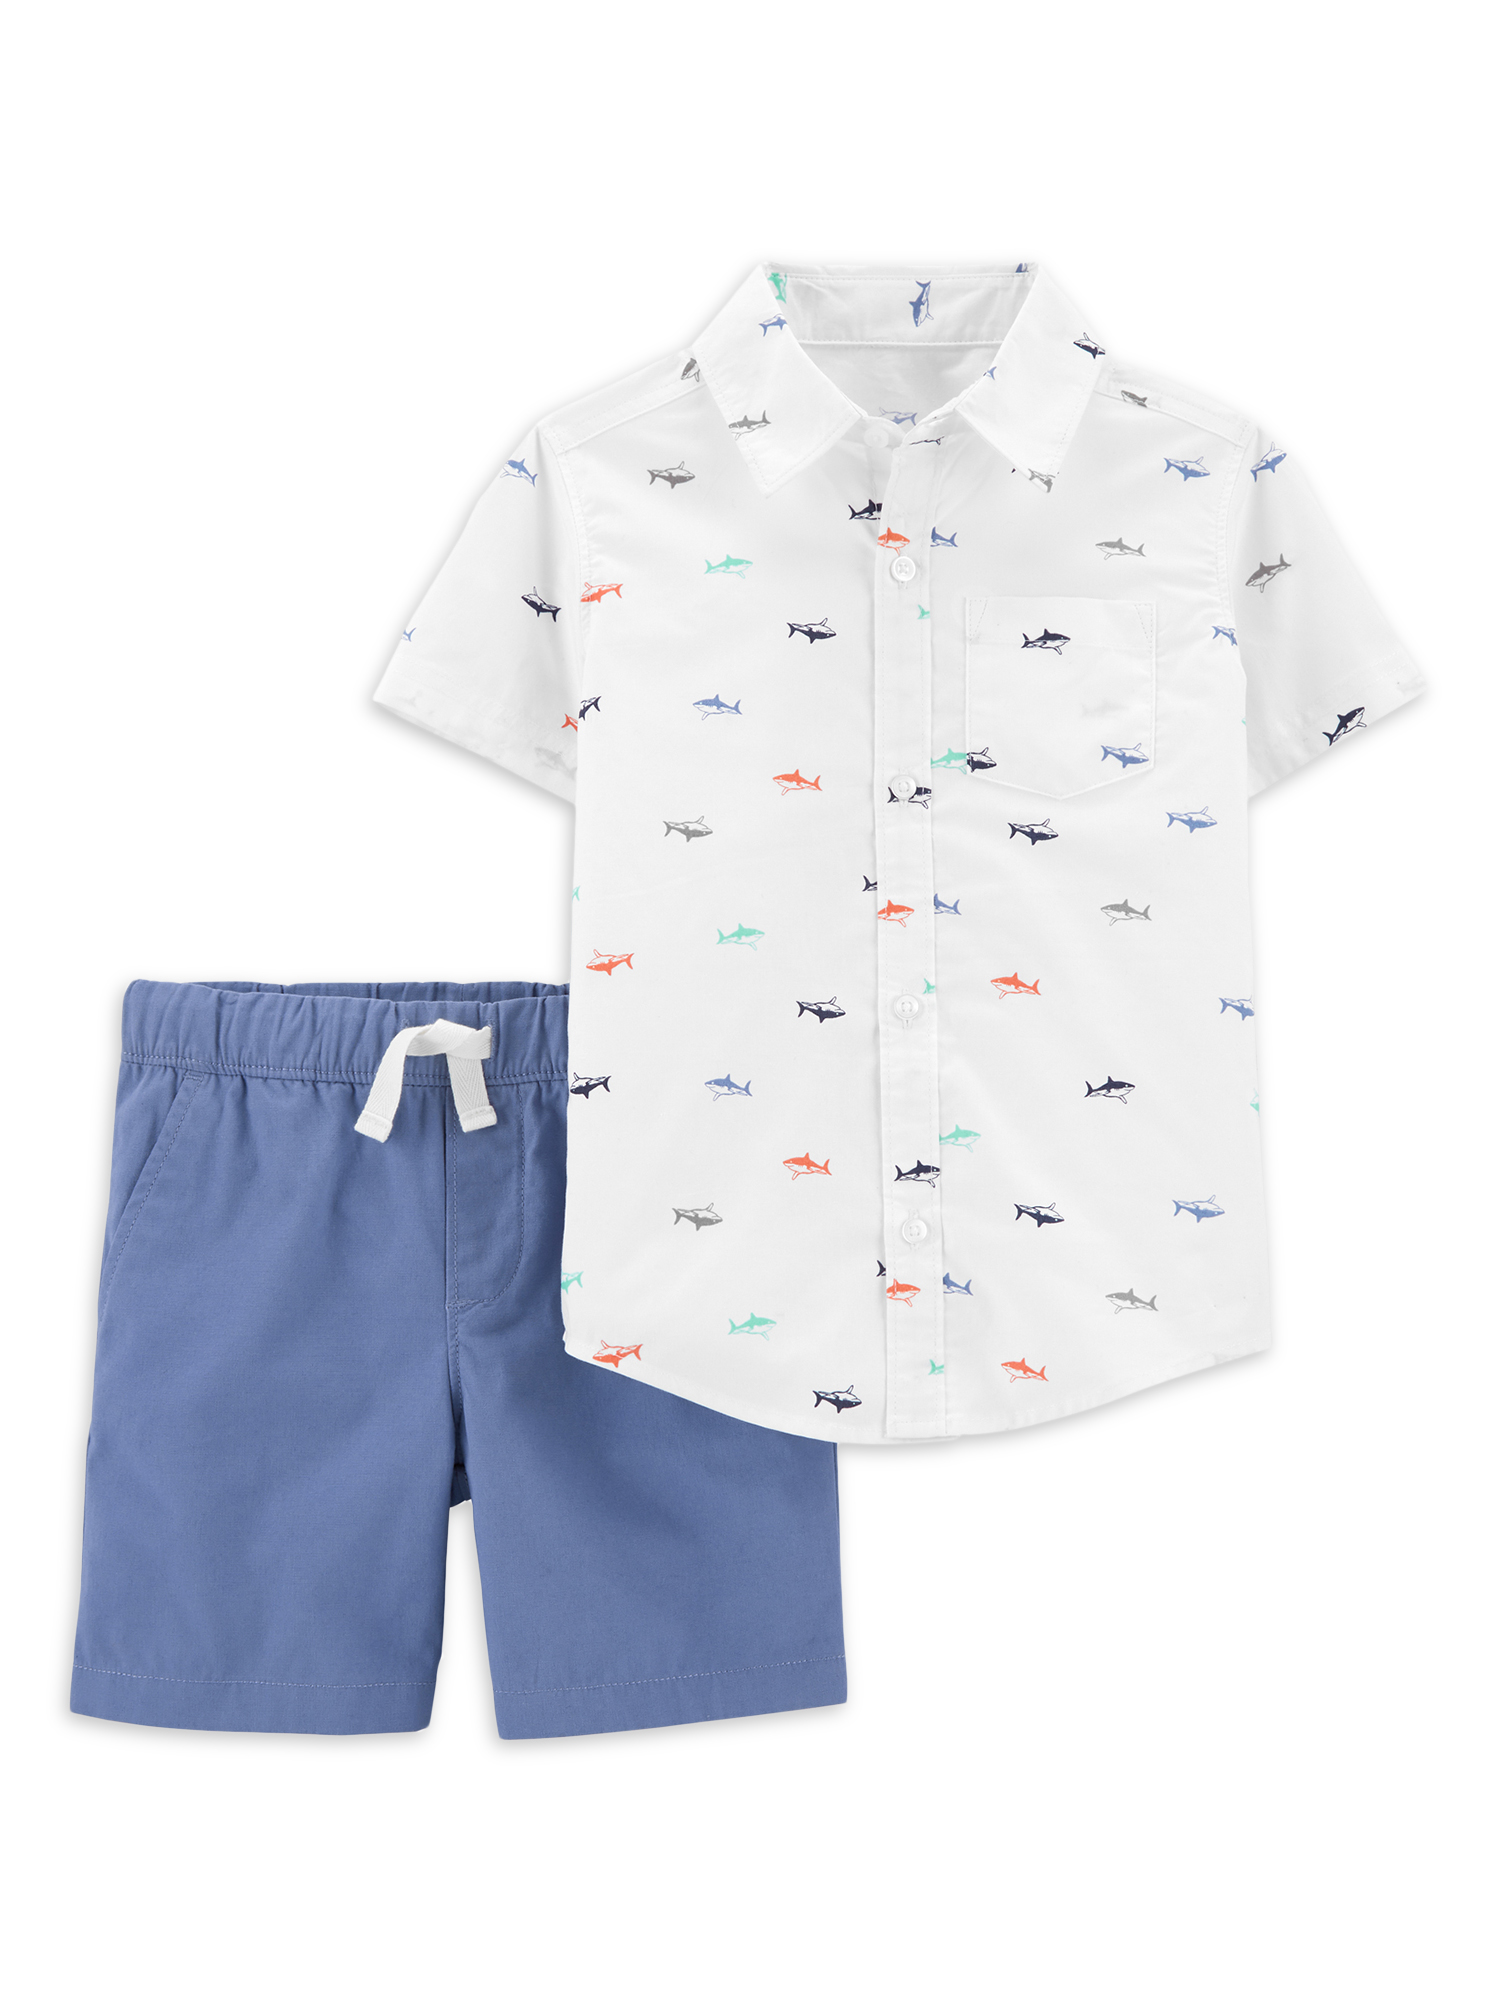 Carter's Child of Mine Baby and Toddler Boy Button-Up Woven Shirt and Shorts Outfit Set, 2-Piece, Sizes 12M-5T - image 1 of 2